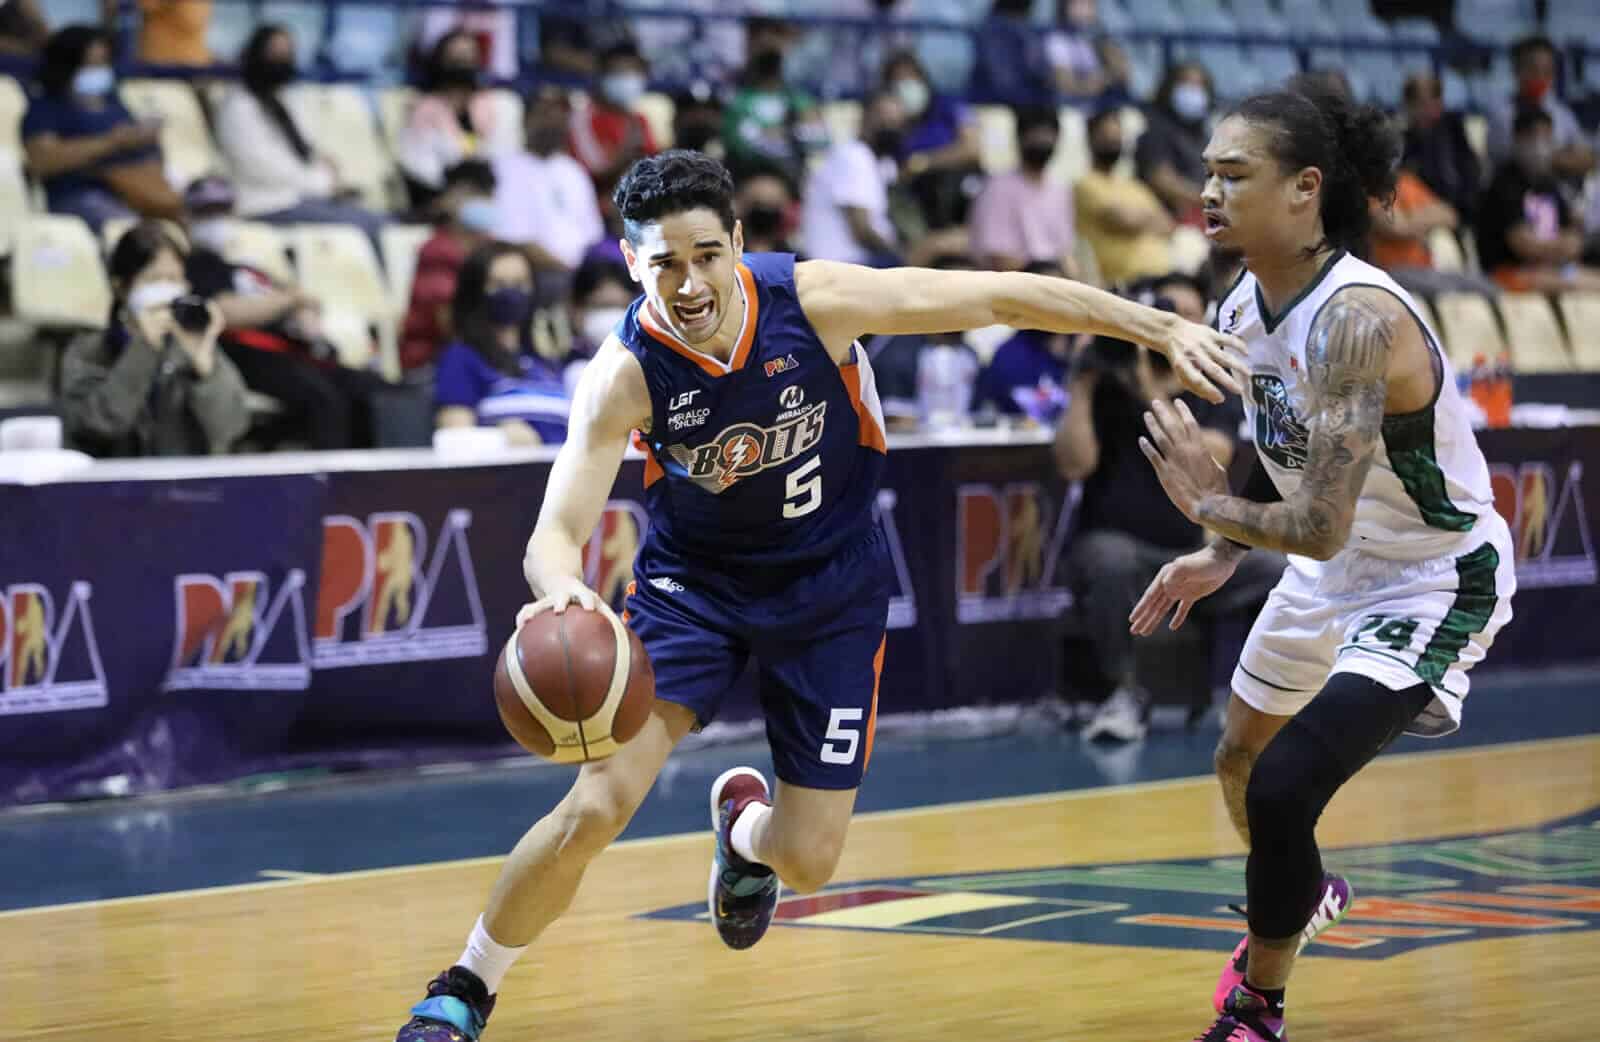 Meralco basketball player dribbles the ball on the court.